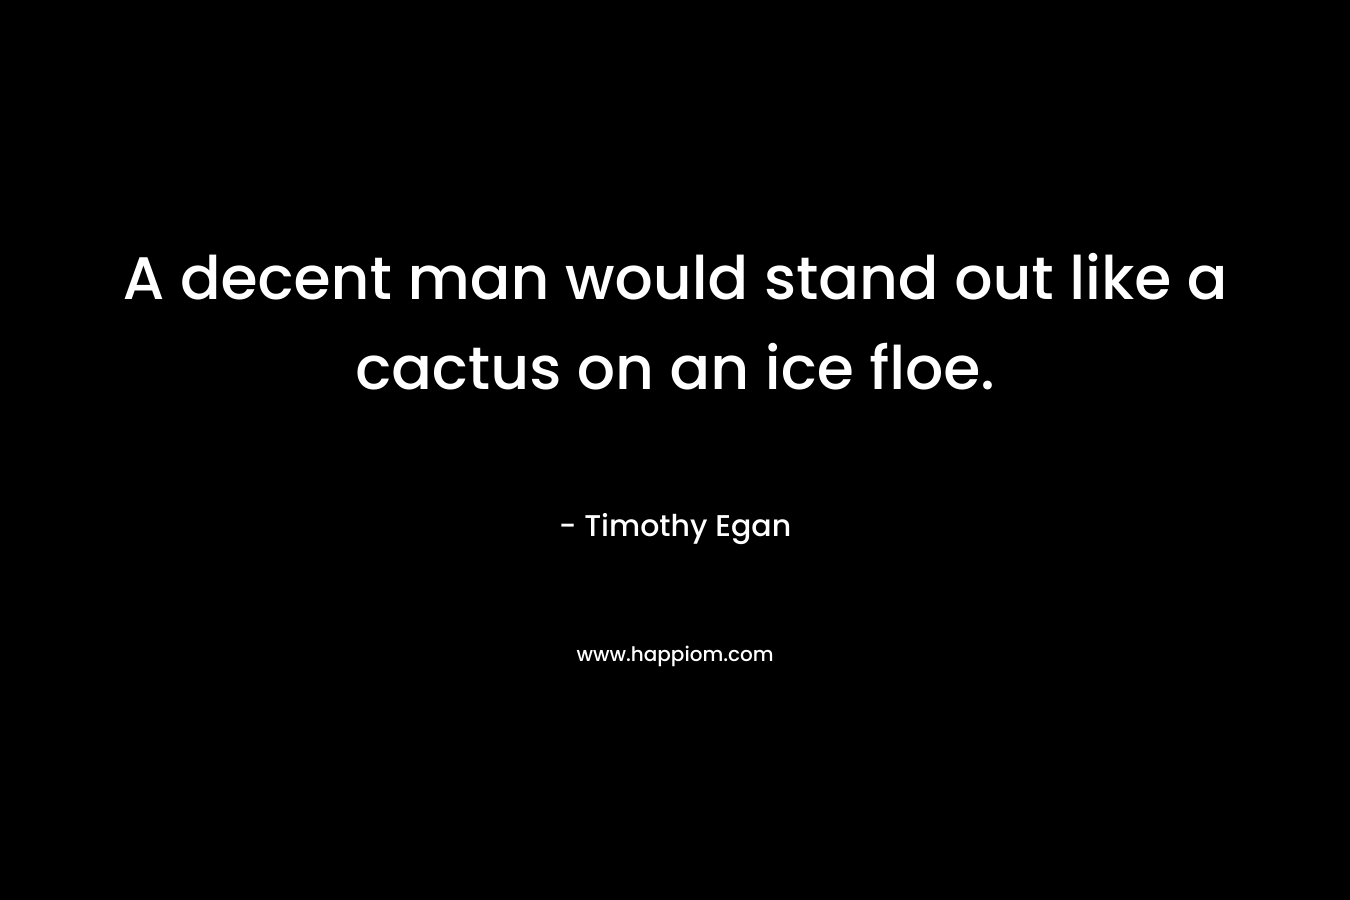 A decent man would stand out like a cactus on an ice floe. – Timothy Egan